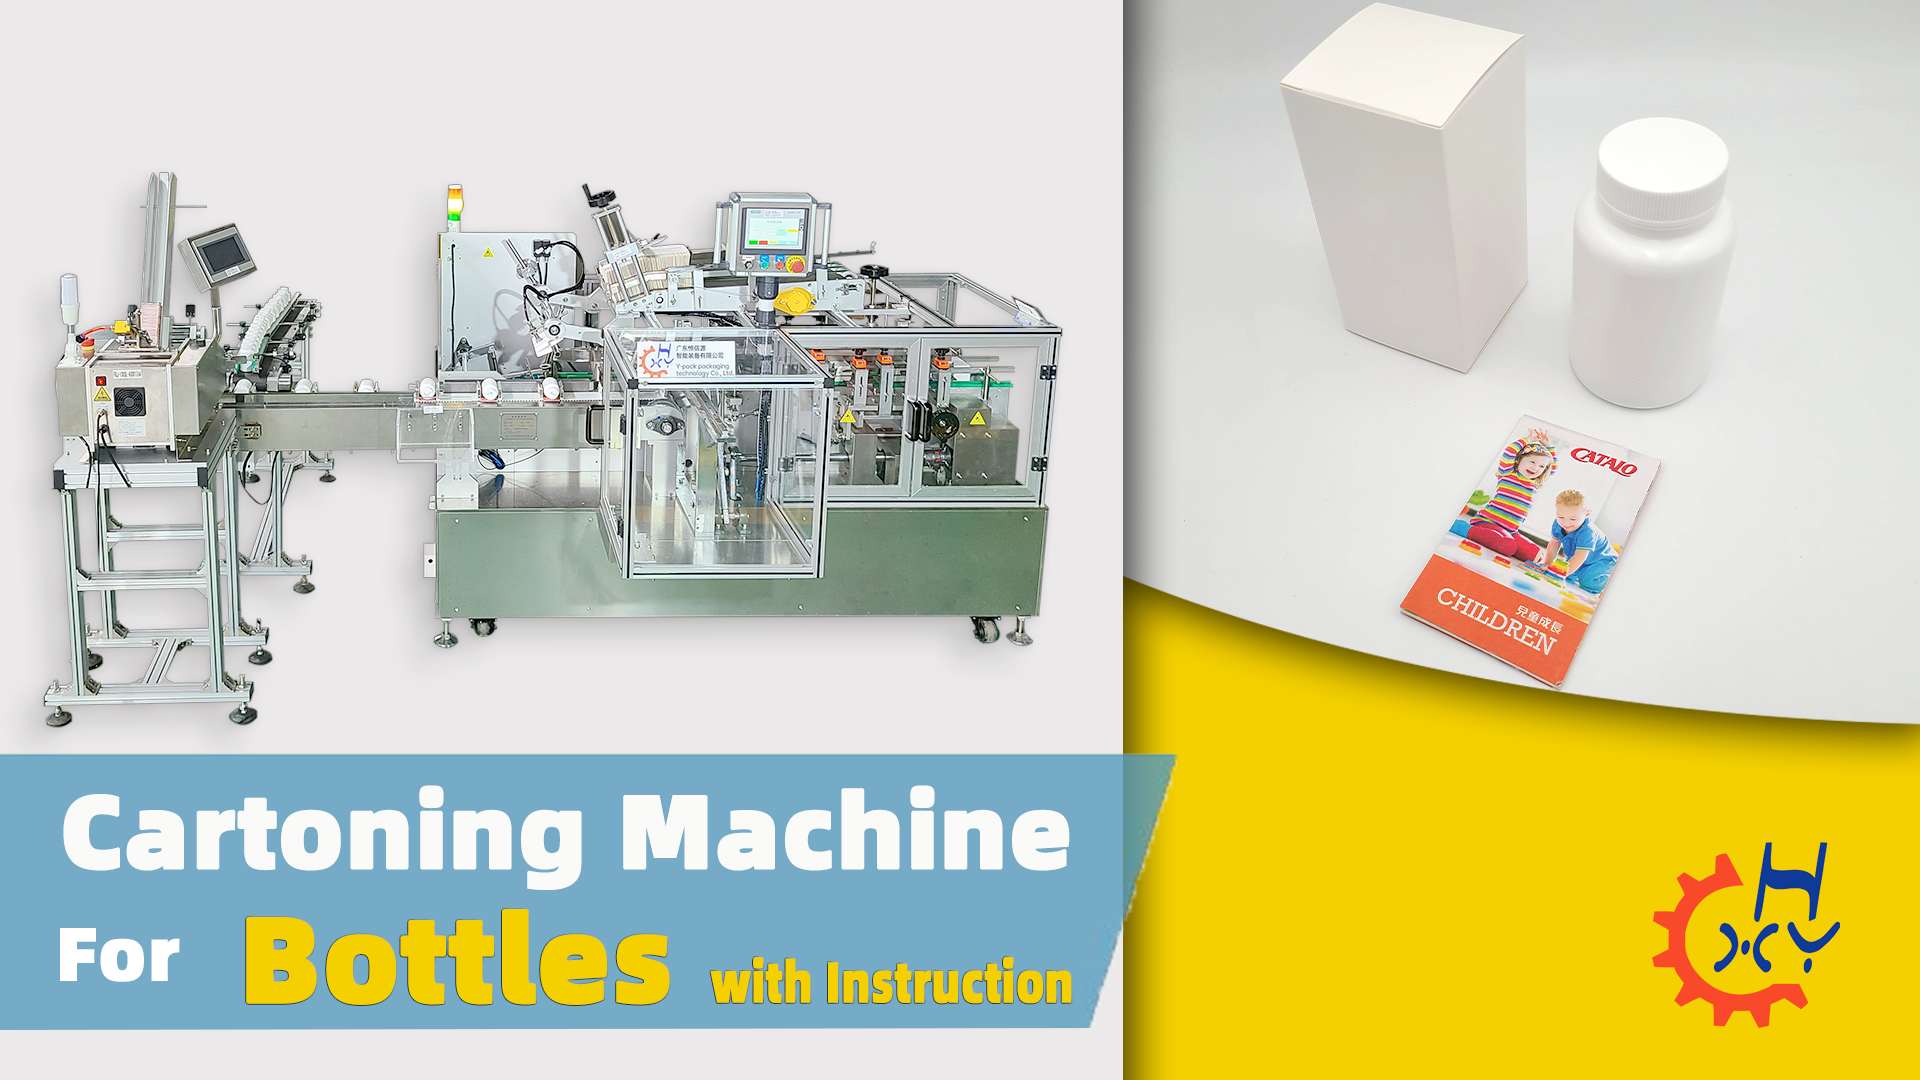 Bottle with Instructions Automatic Material Sorting Cartoning Machine